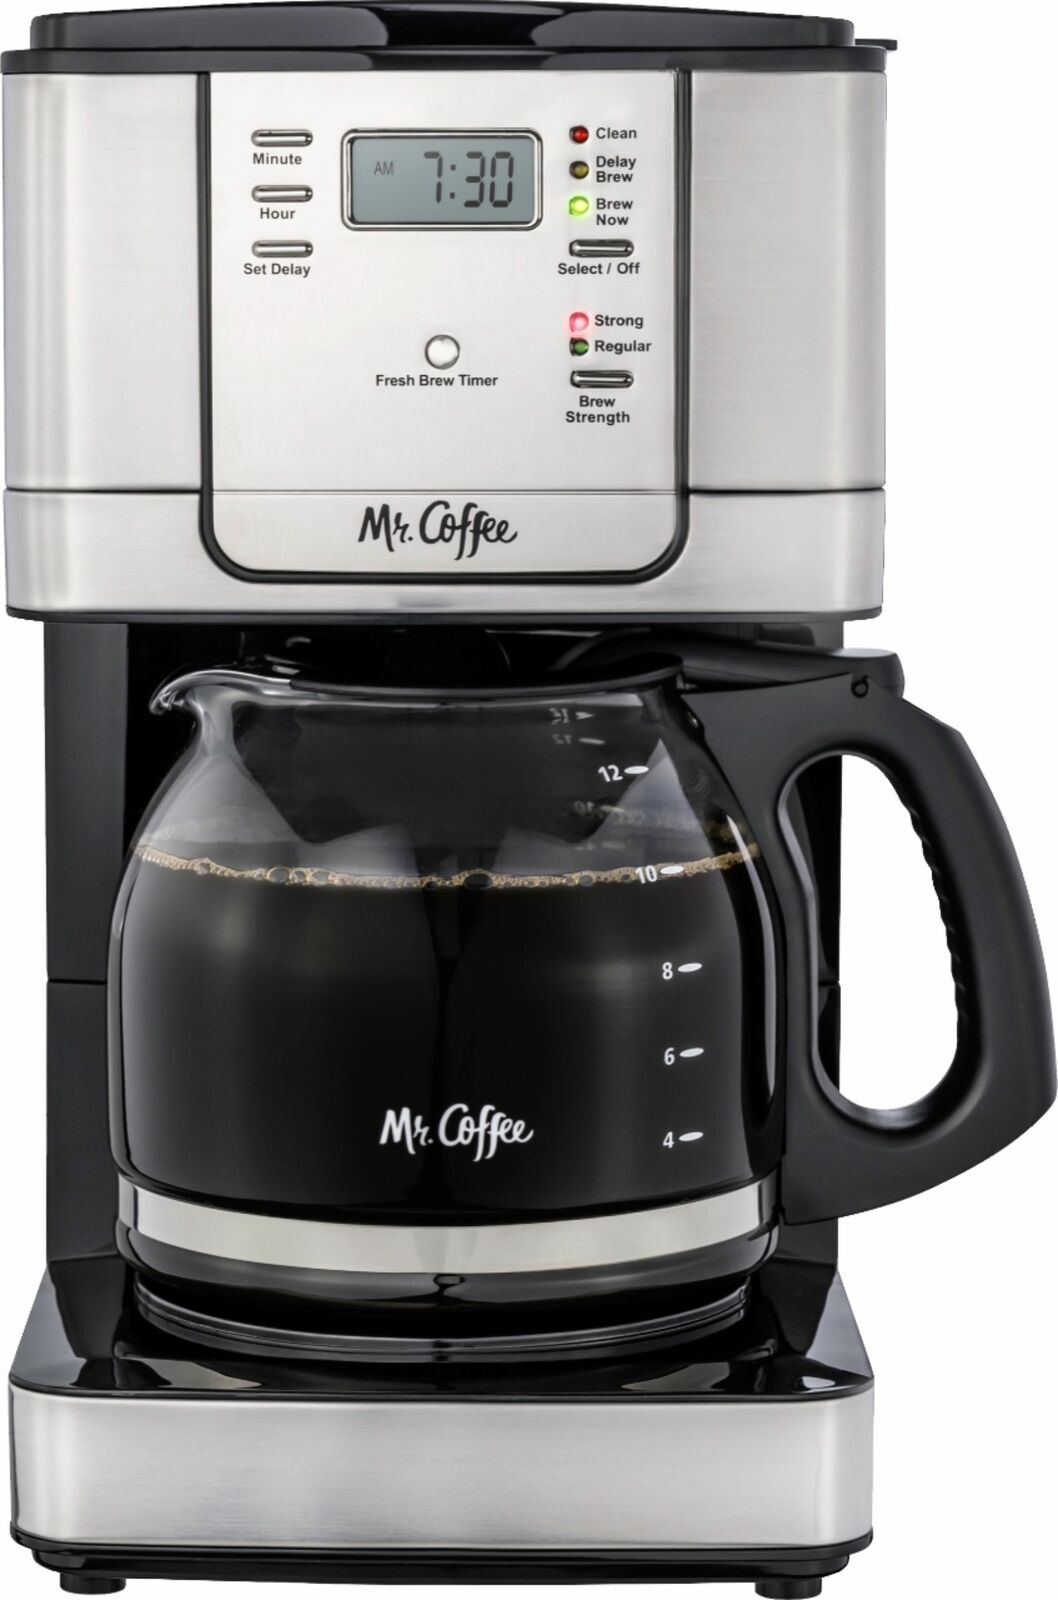 12 Mr. Coffee - 12-Cup Coffee Maker with Strong Brew Selector -  Stainless Steel